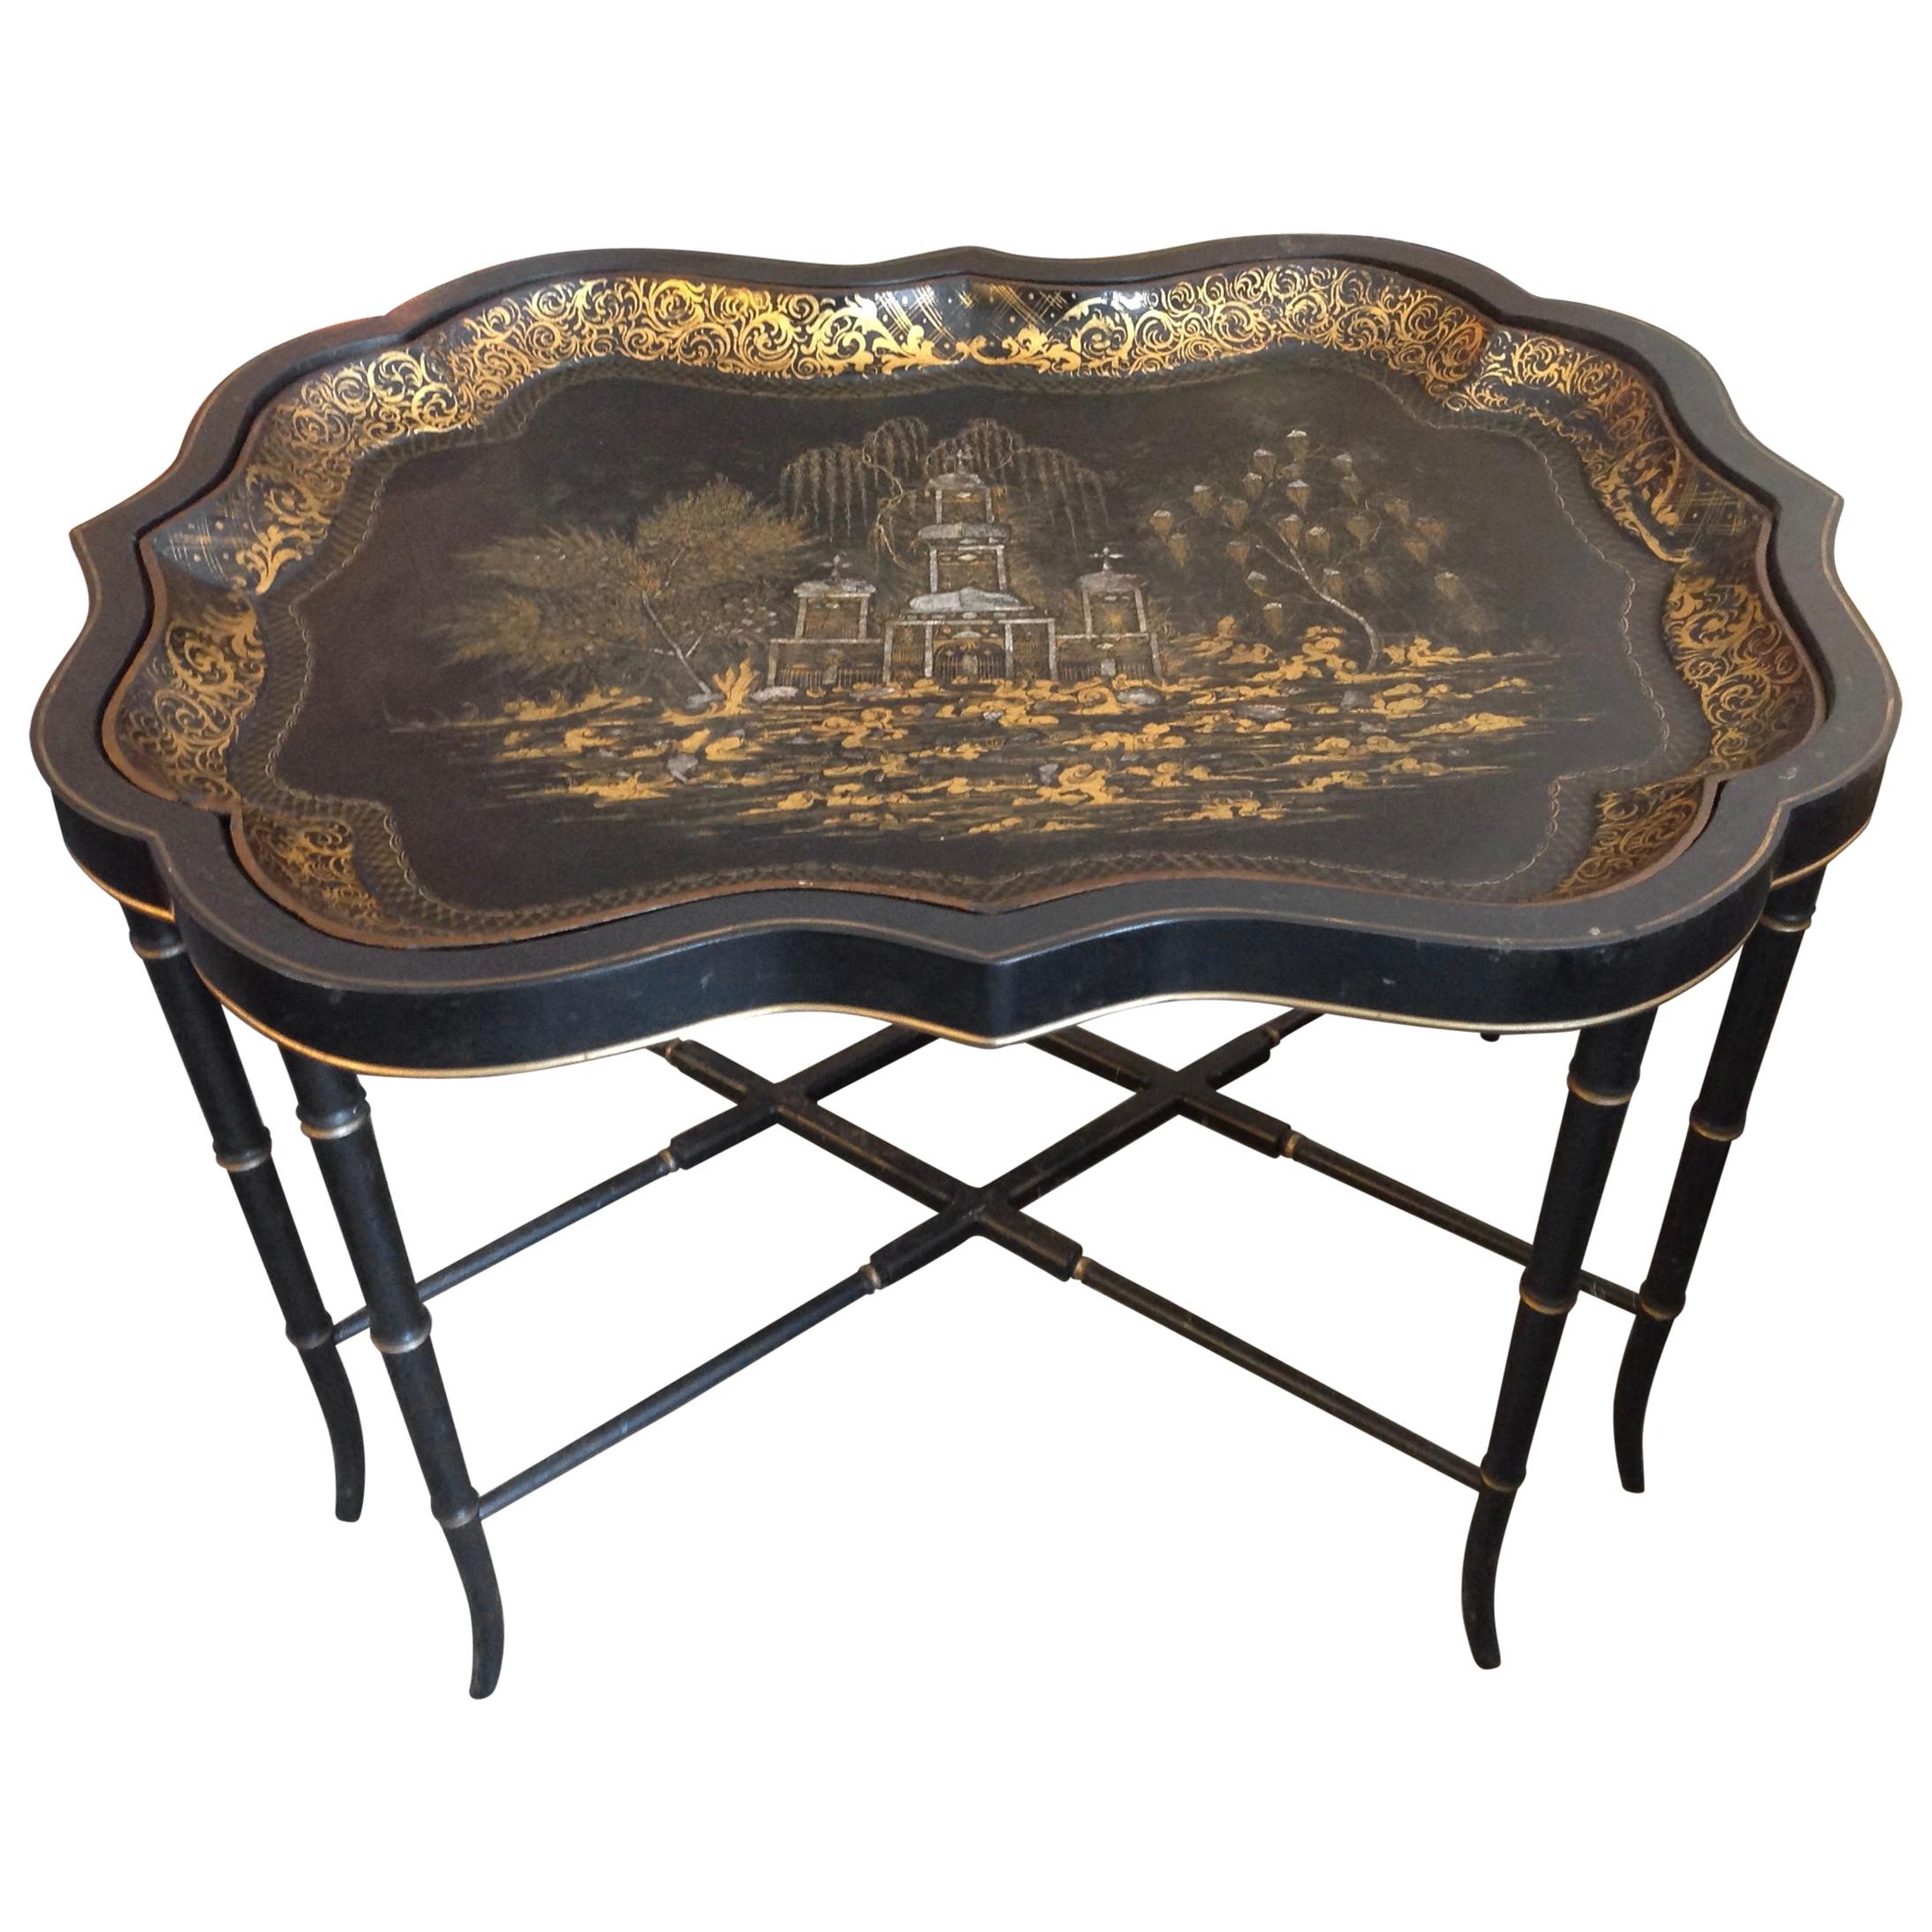 19th Century English Chinoiserie Abalone and Gilt Papier Mâché Tray on Stand